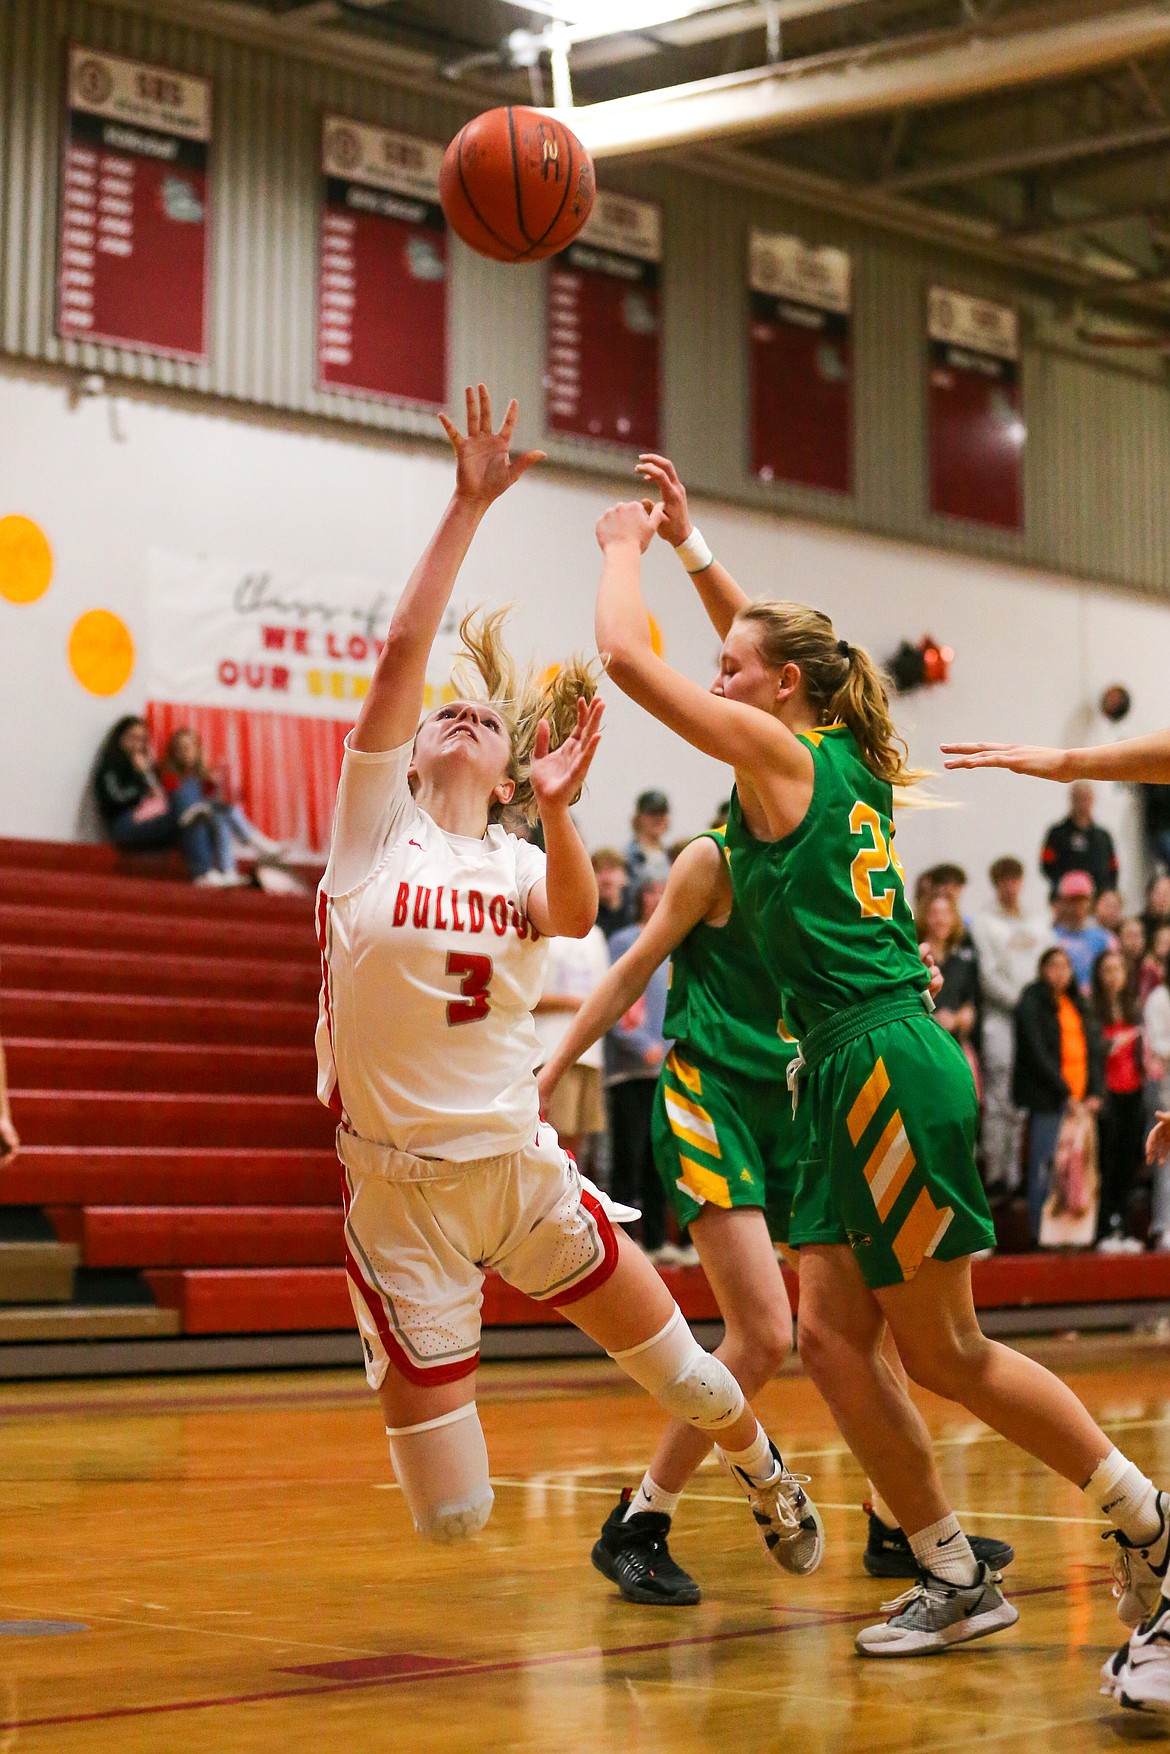 Junior Daylee Driggs attempts a shot while falling to the floor during Saturday's game against Lakeland at Les Rogers Court. She scored a career-high 23 points.